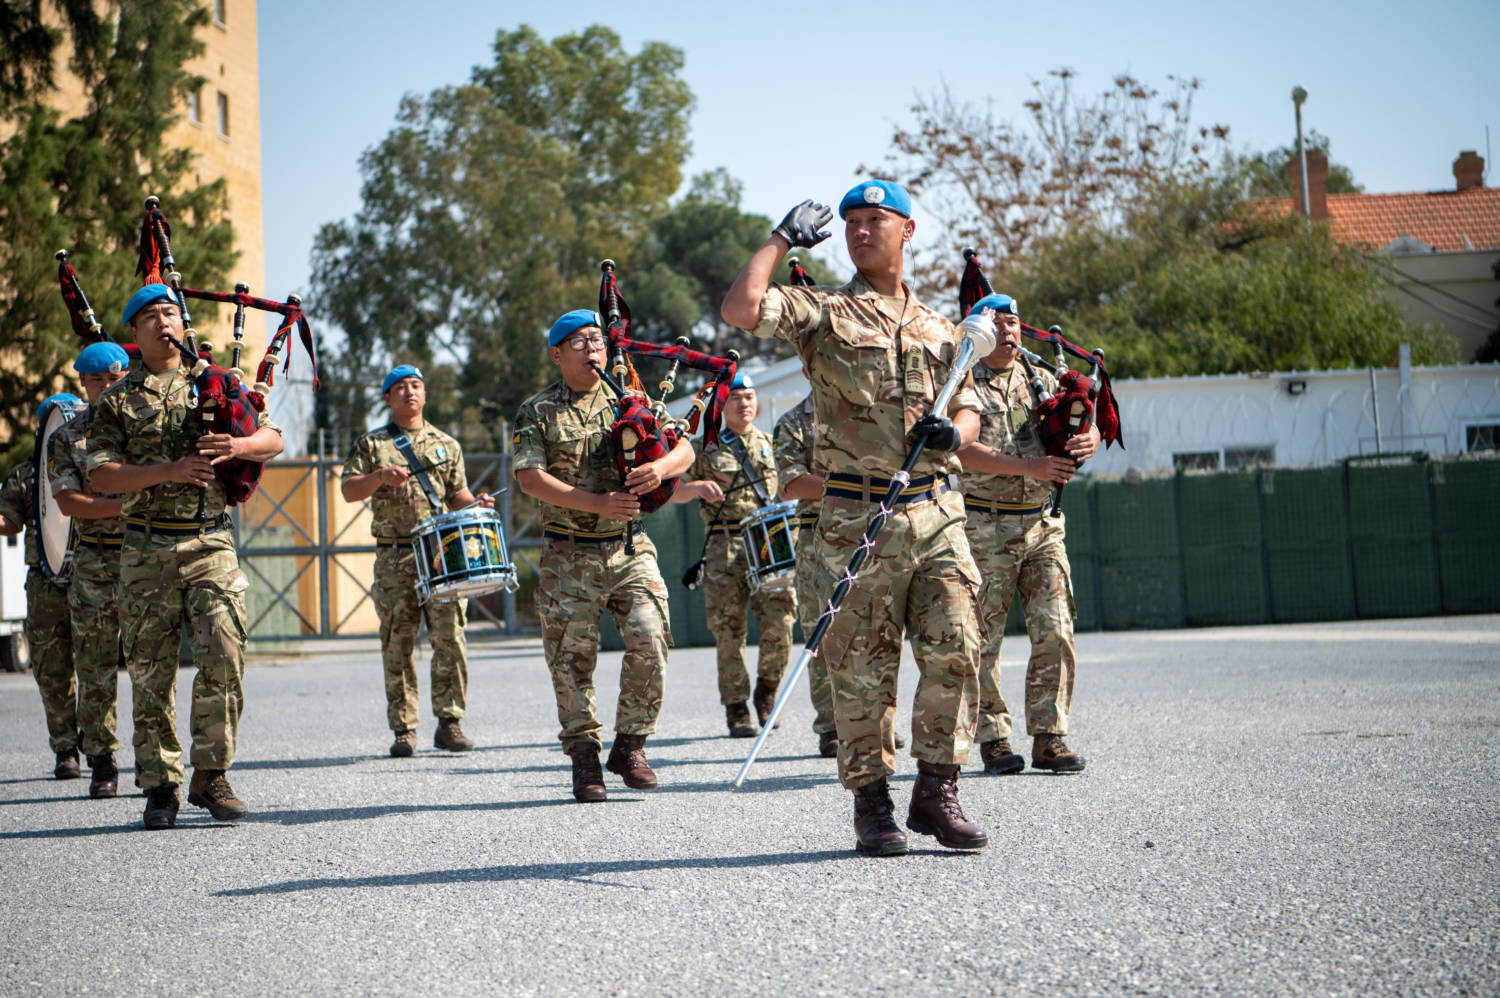 Peacekeepers From The Uk From The Queens Own Gurkha Logistic Regiment Based In Ledra Palace Hotel Inside The Buffer Zone 2